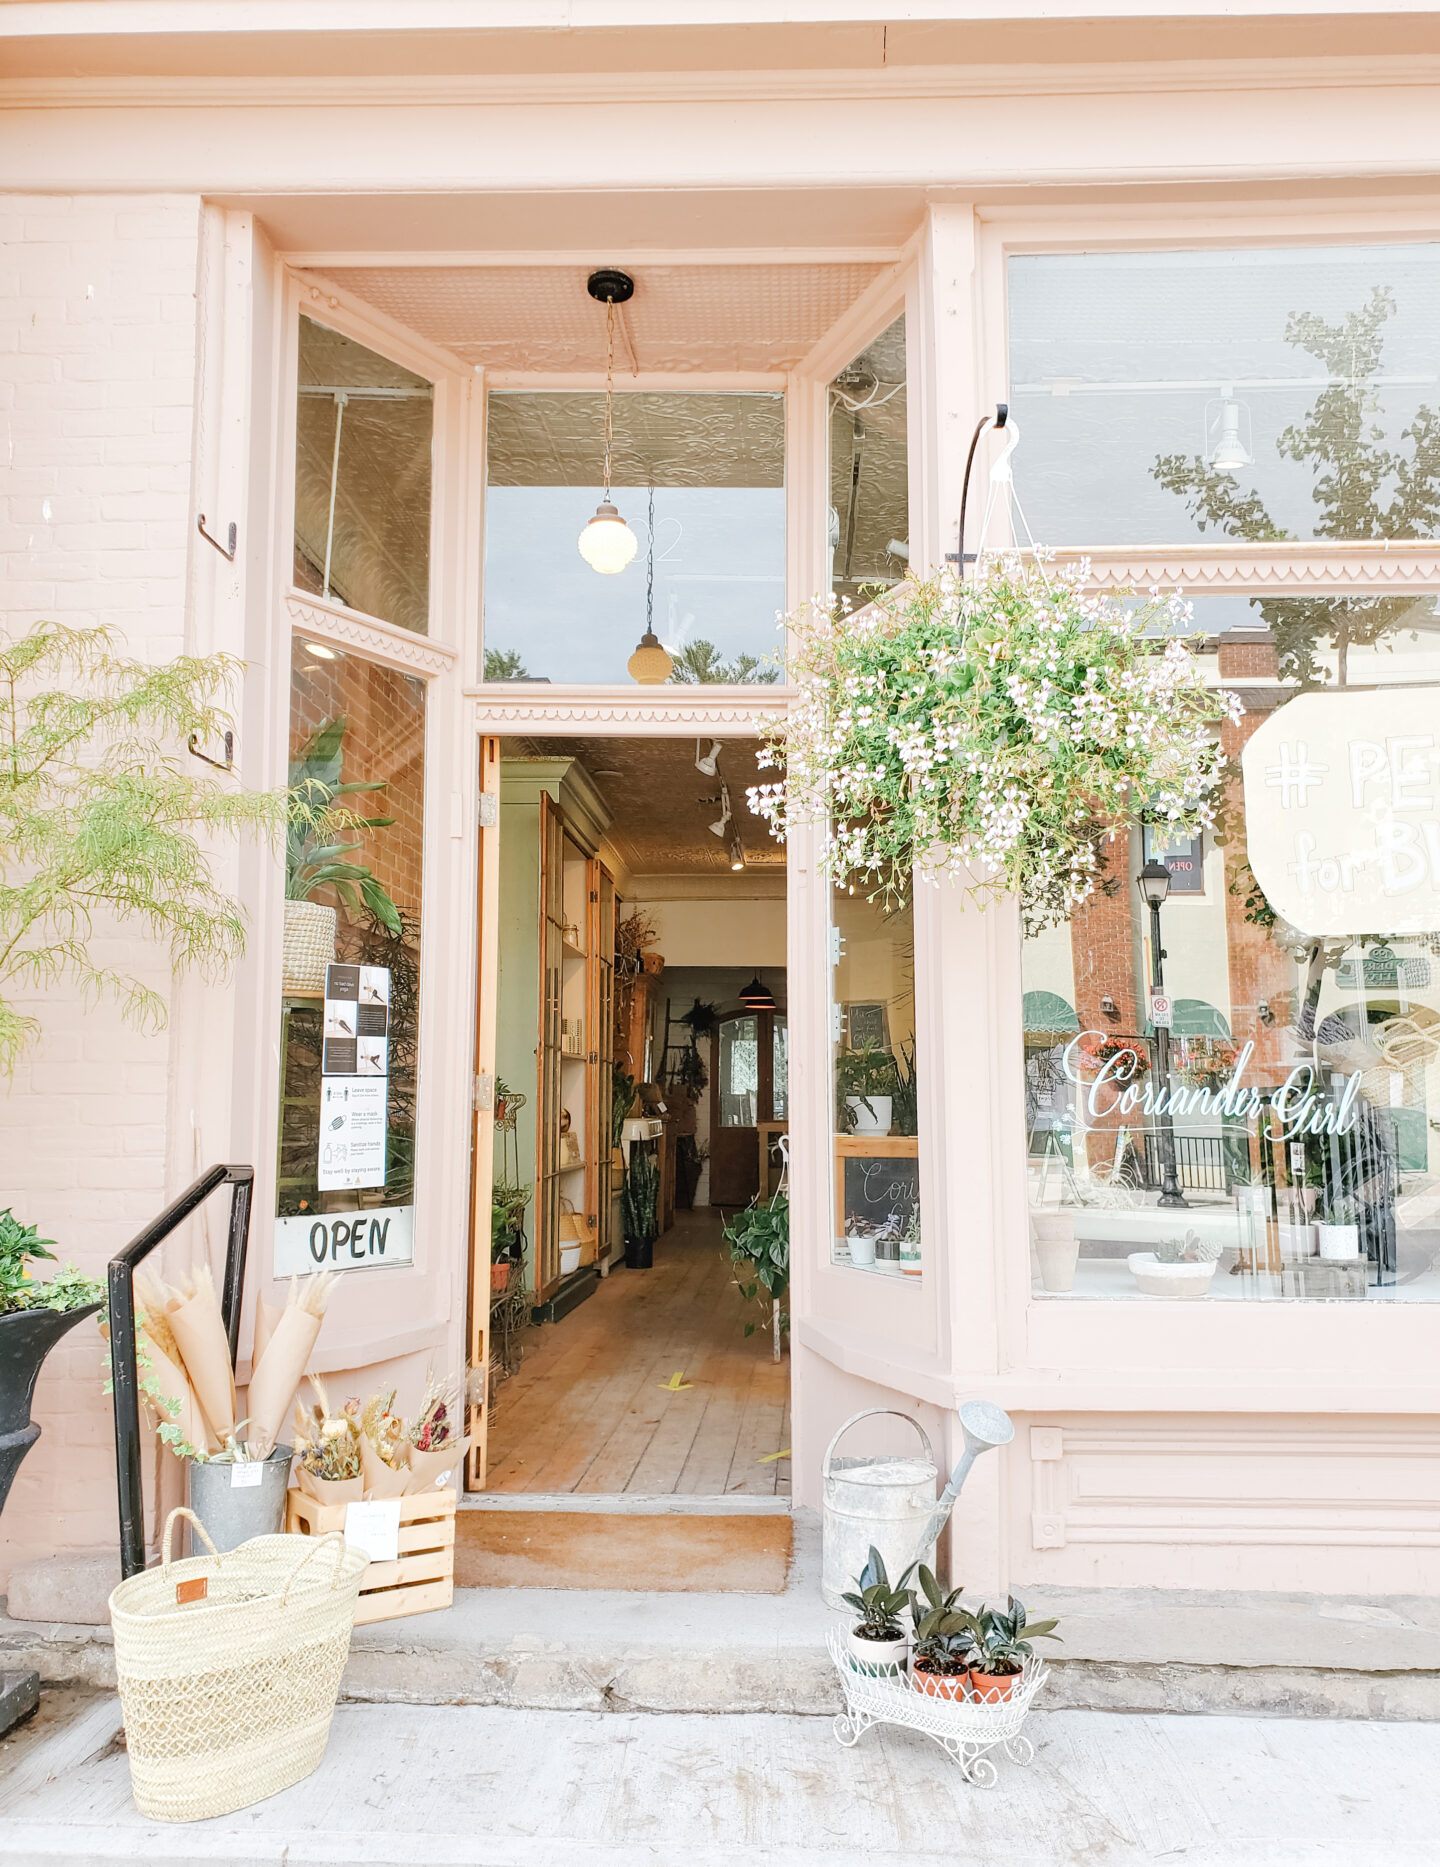 Where to shop in Prince Edward County